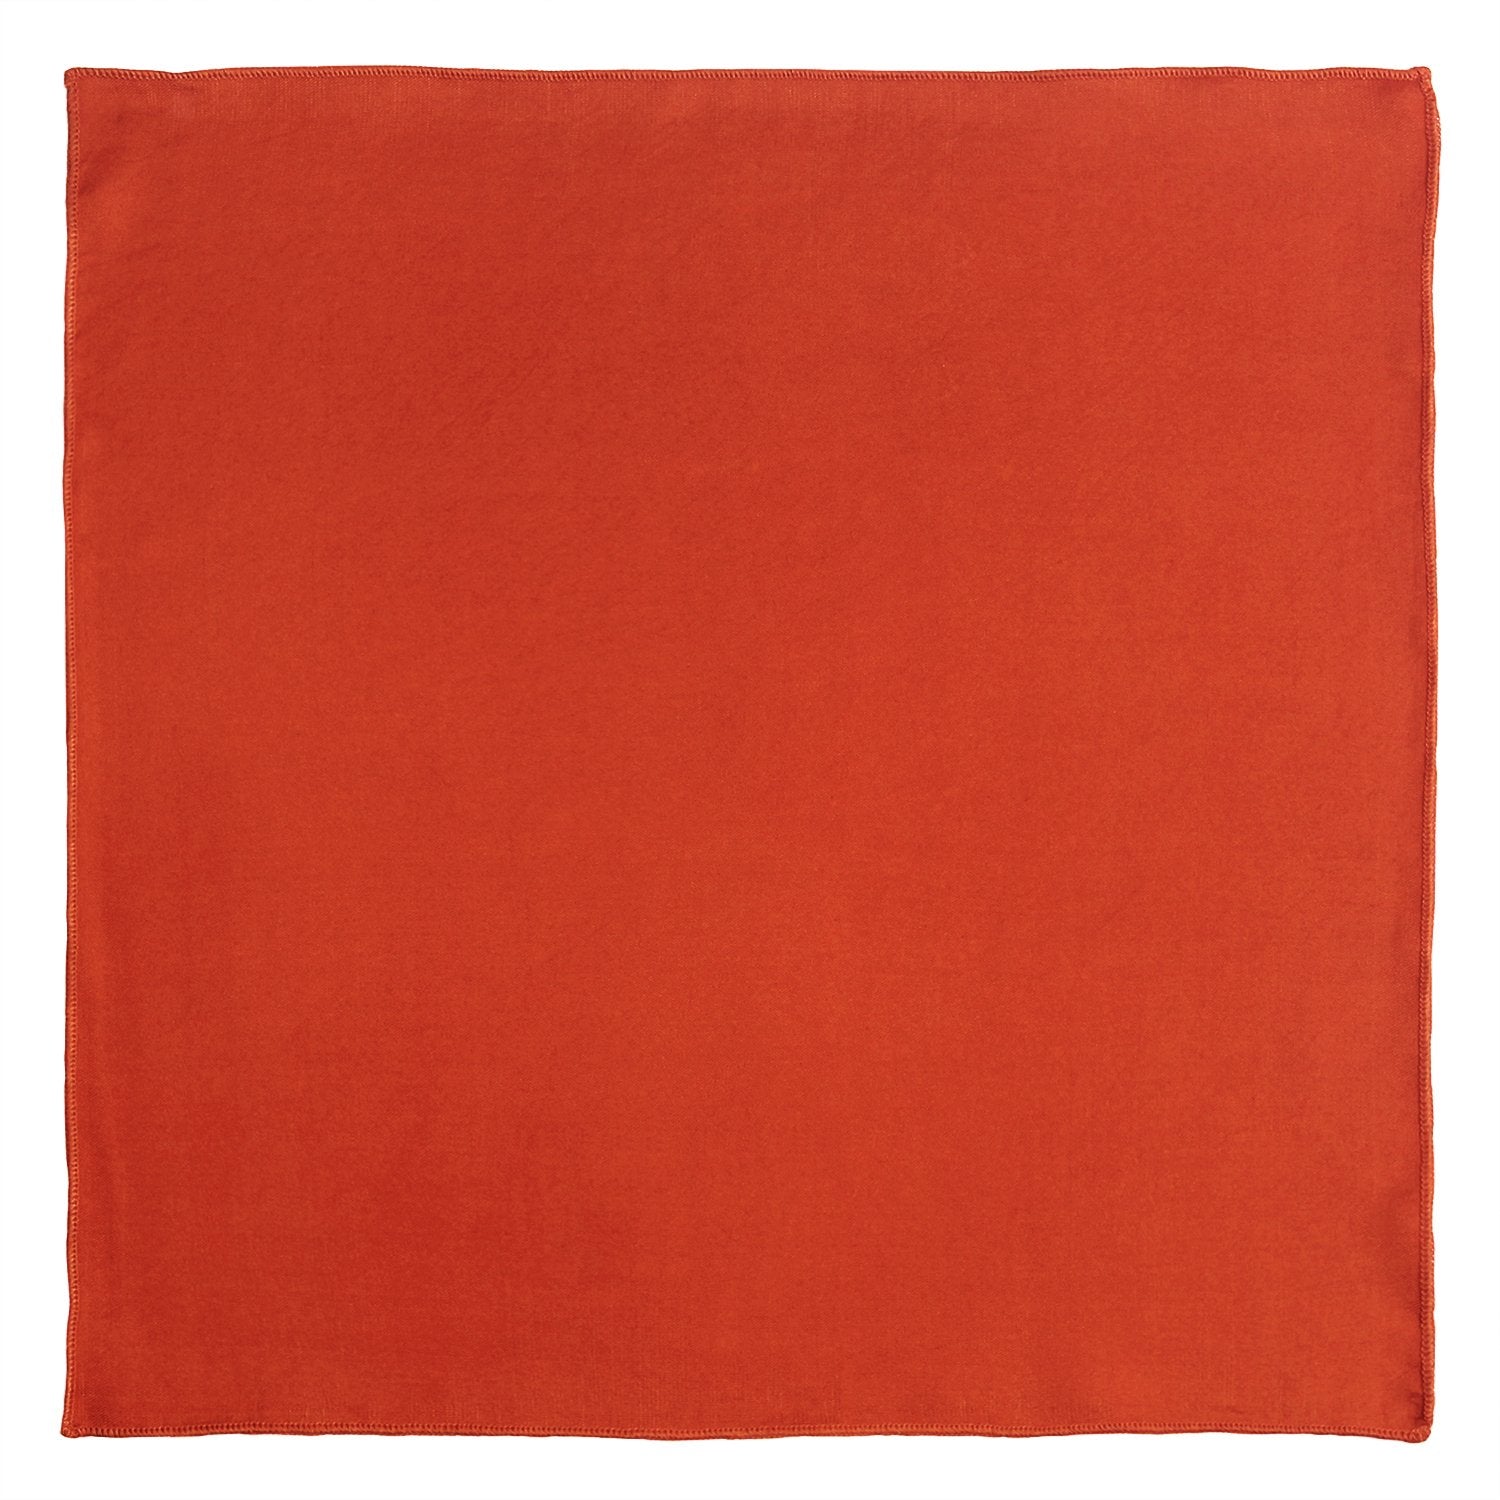 Chokore Mandarin Red Pure Silk Pocket Square, from the Solids Line